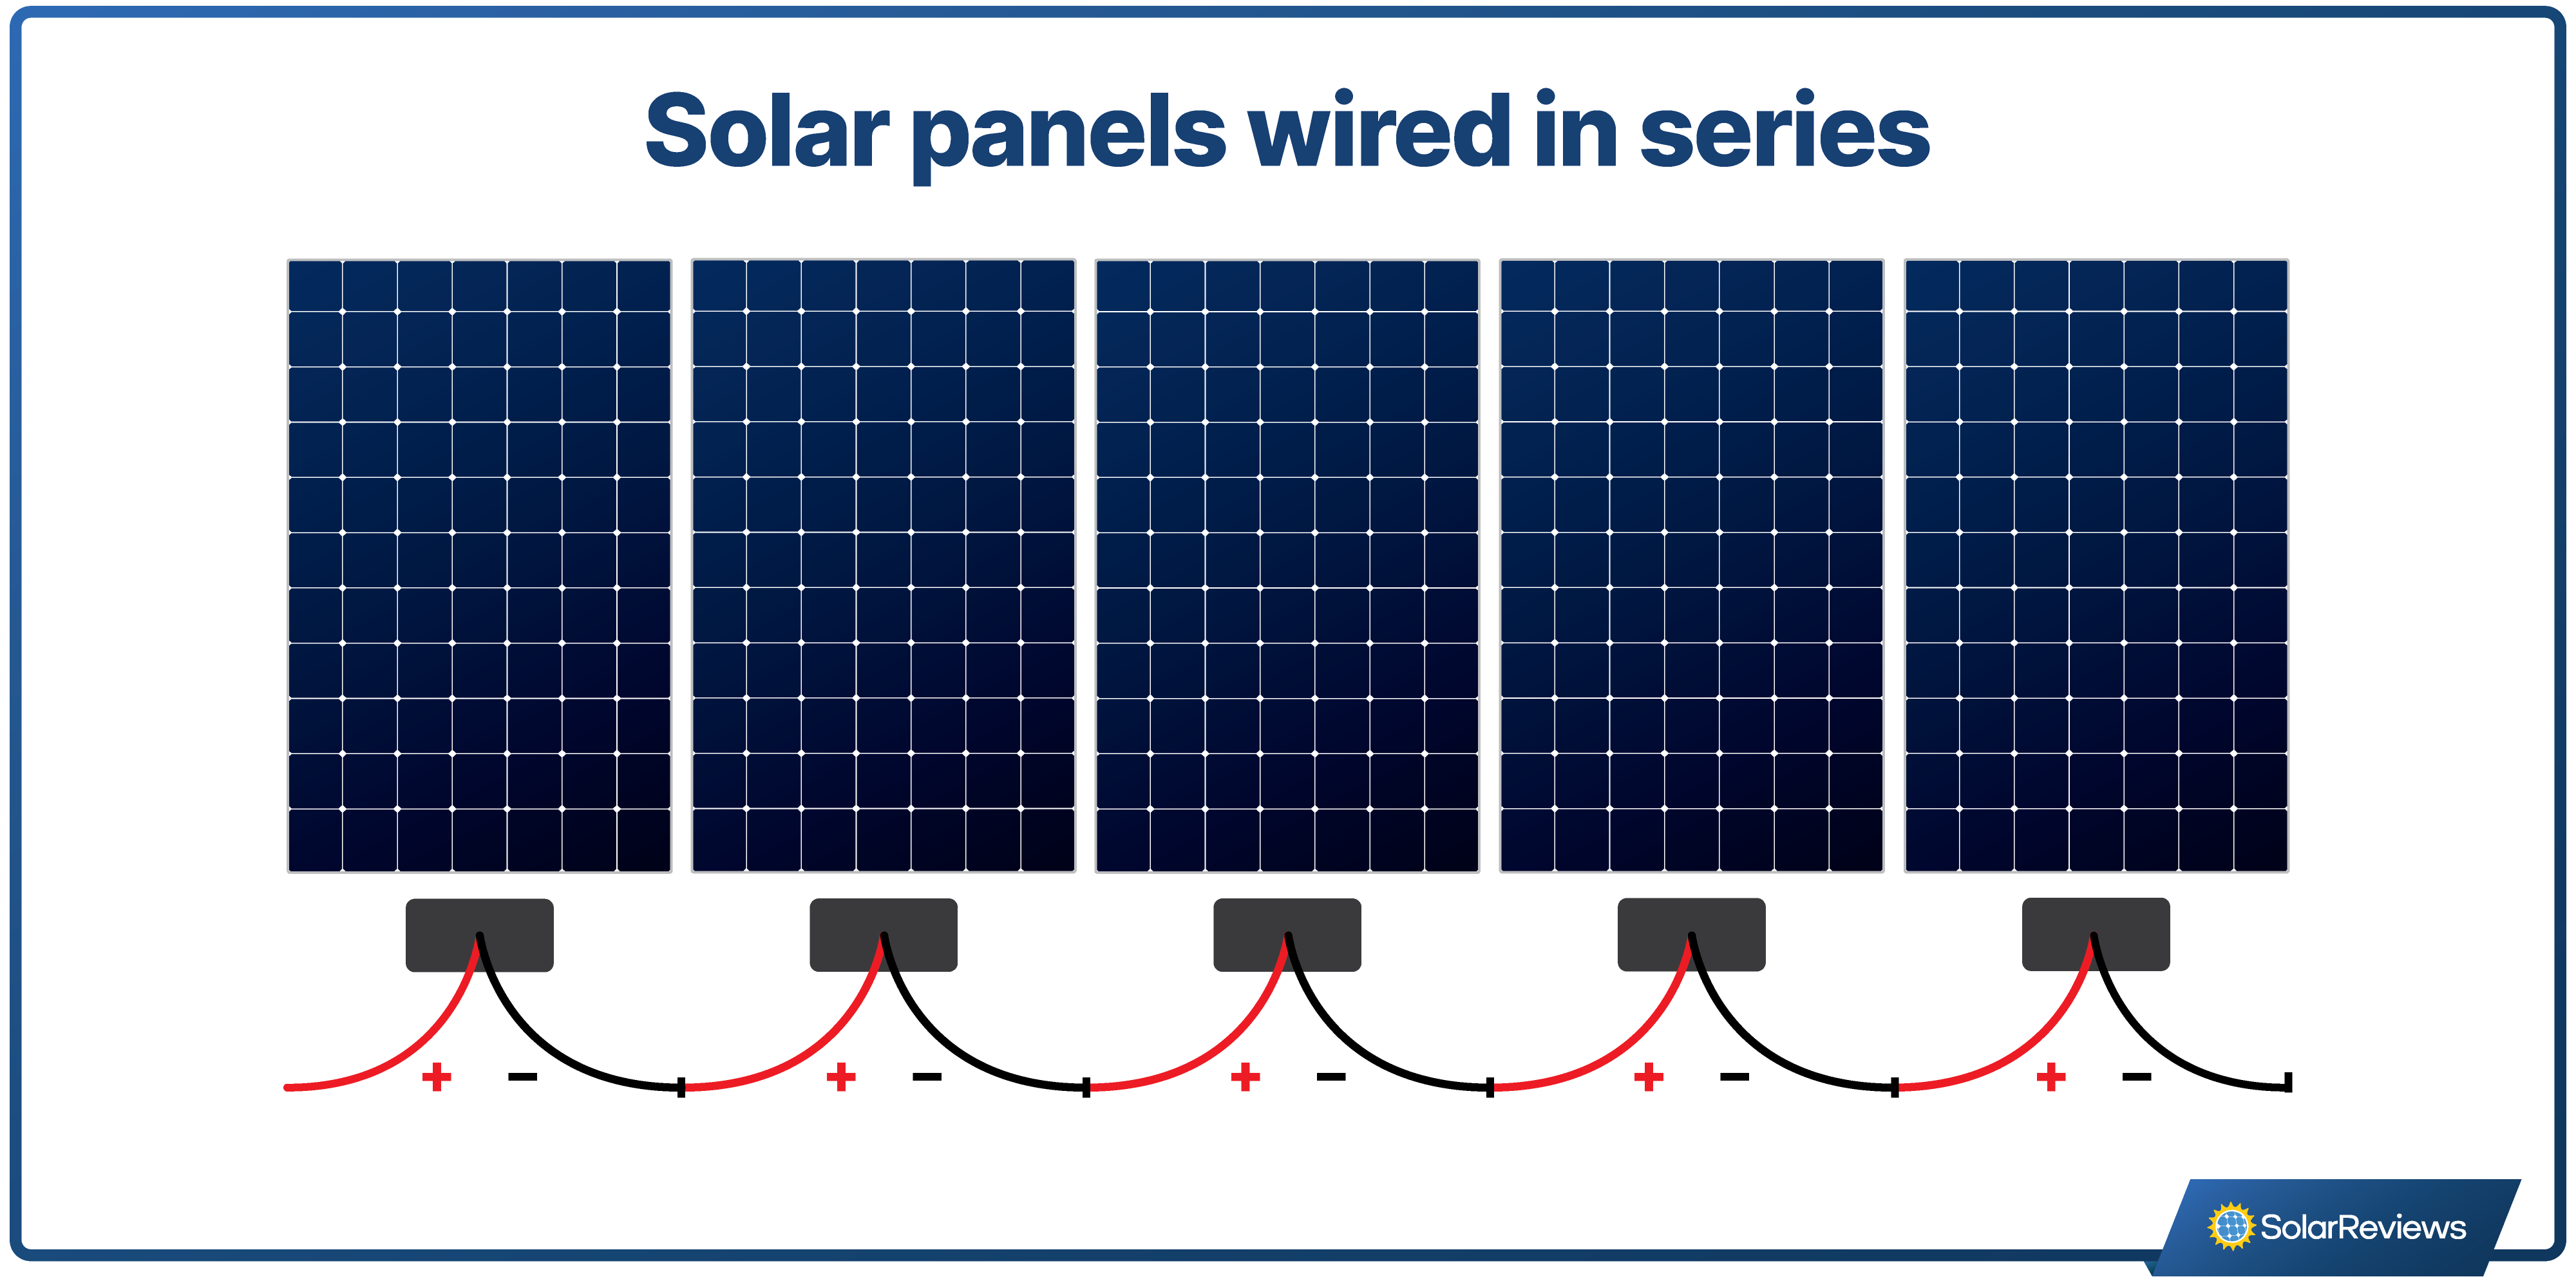 To wire in series, the positive terminal of a solar panel is connected to the negative terminal of another and the voltage increases.